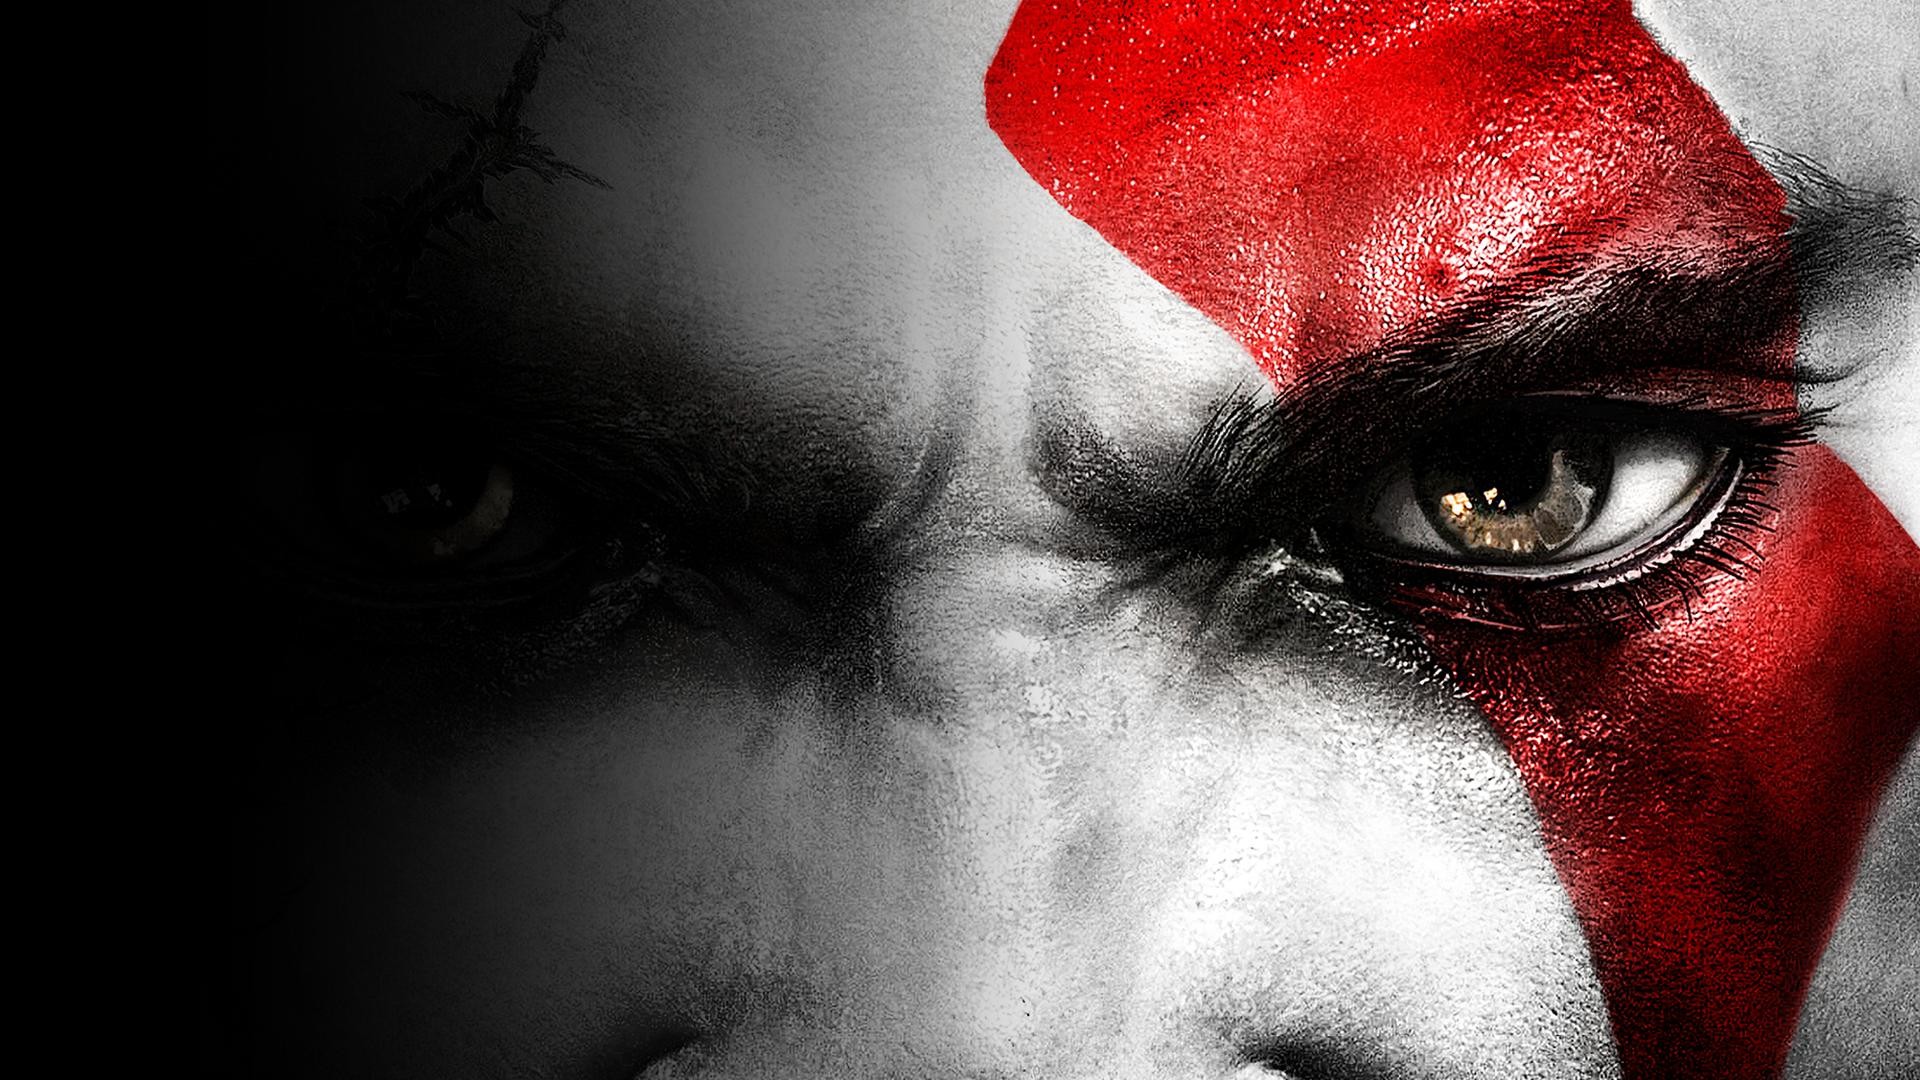 1920x1080 god of war iii image - Full HD Wallpapers, Photos (Commodore Black